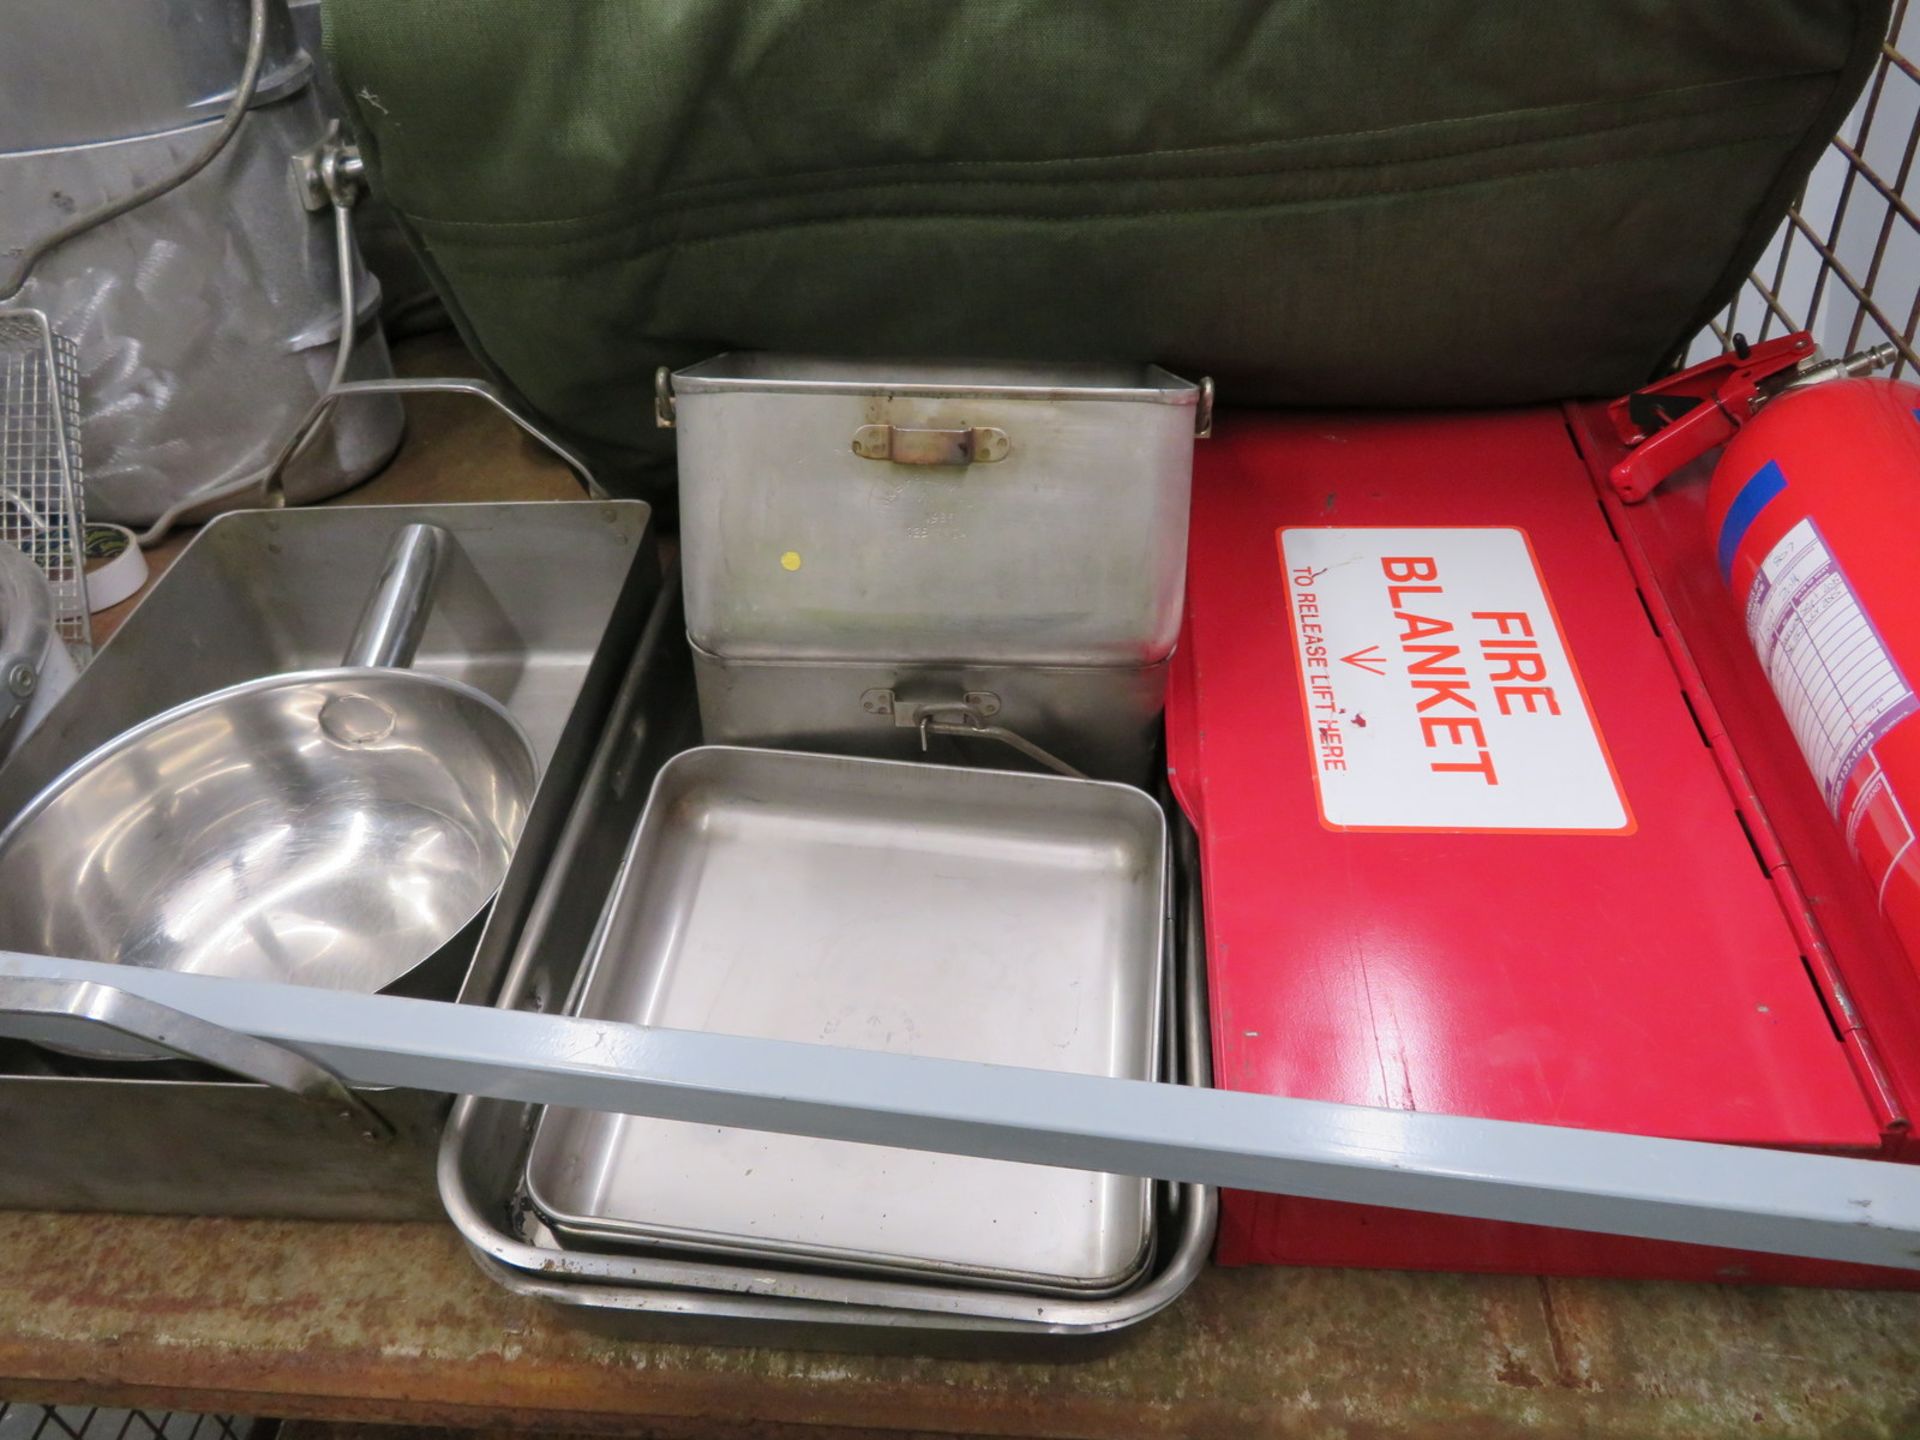 British Army No 5 field cooker & G1 No 5 hot box field oven set. - Image 14 of 16